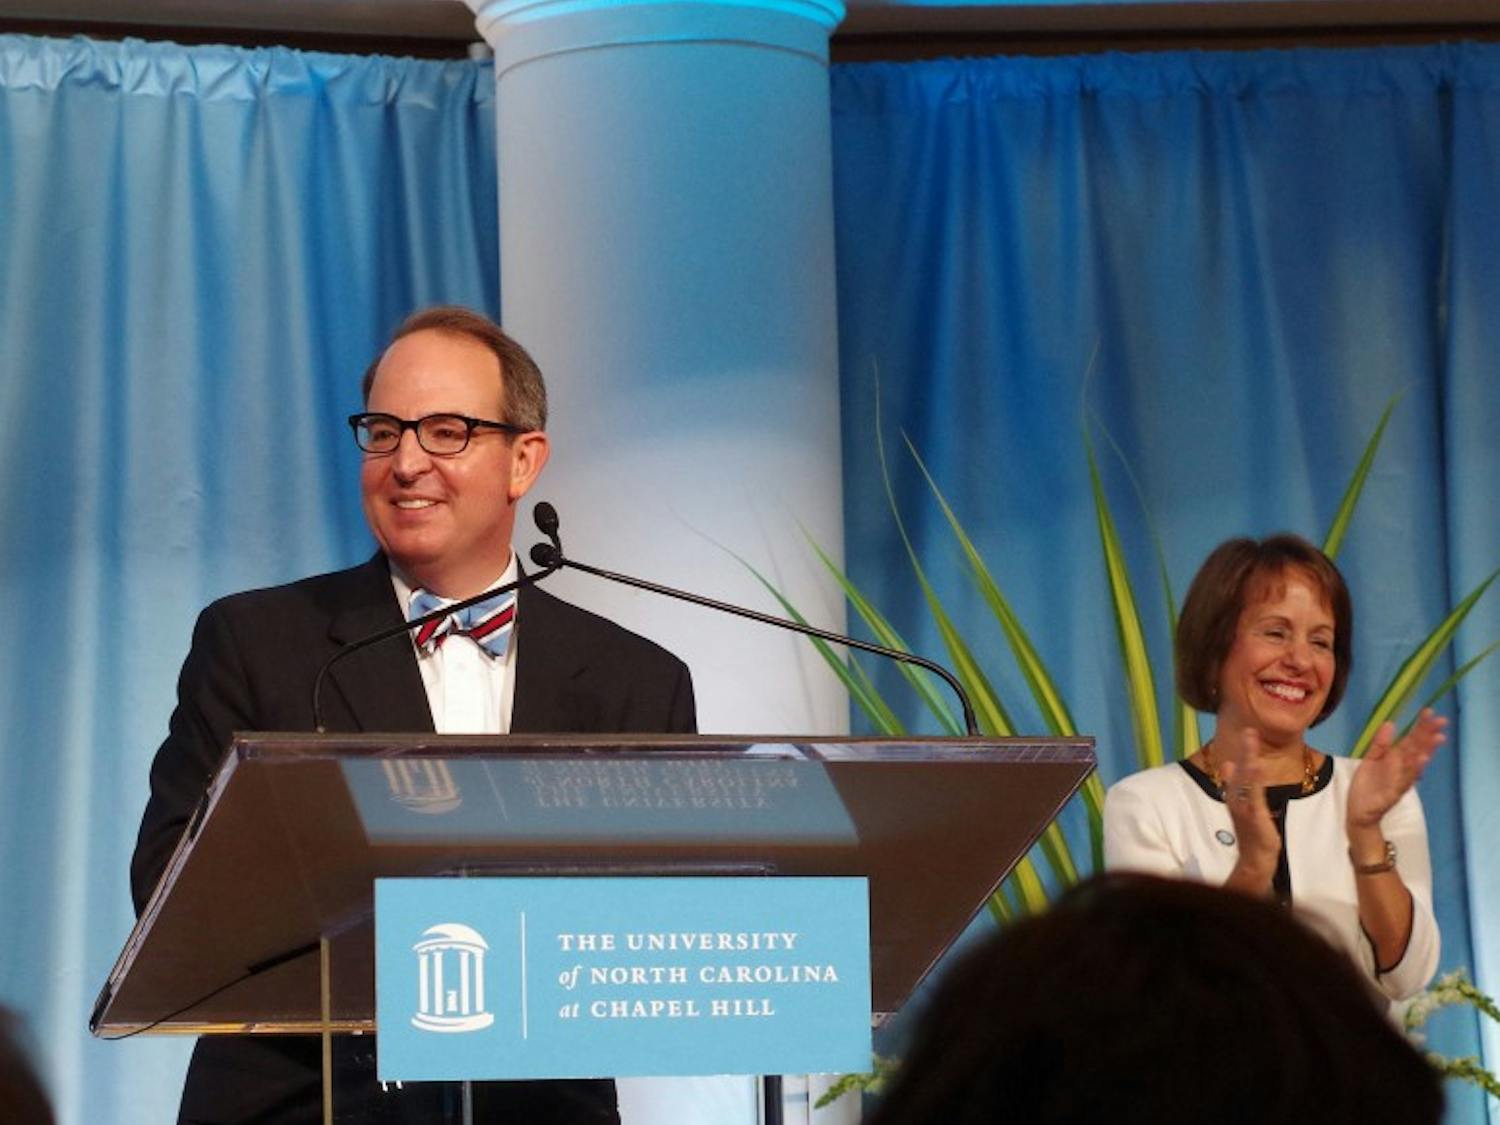 Martin Brinkley took the stage as the fourteenth dean of the UNC School of Law in June 2015.